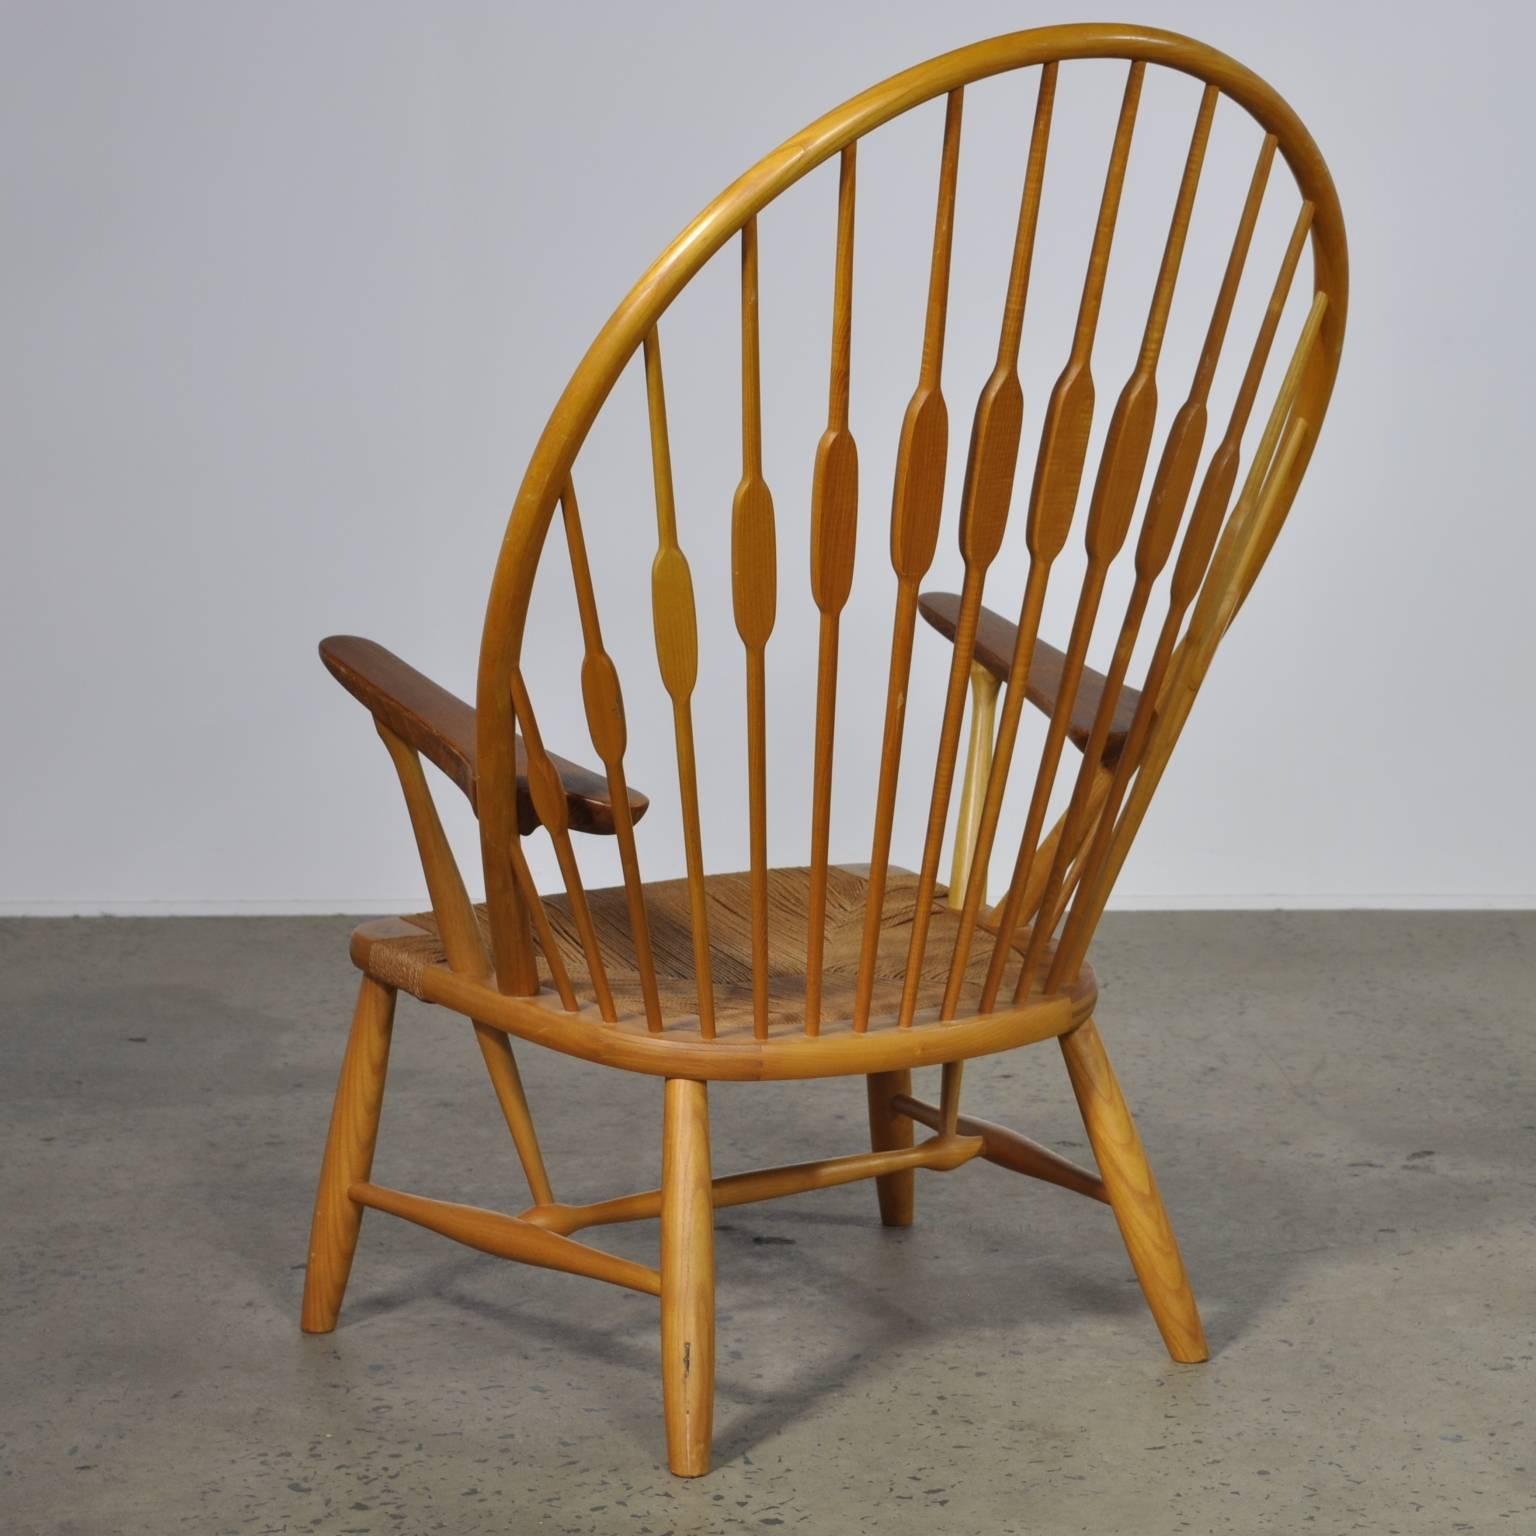 Danish Hans Wegner Peacock Chair Manufactured by Johannes Hansen in Oak and Paper Cord